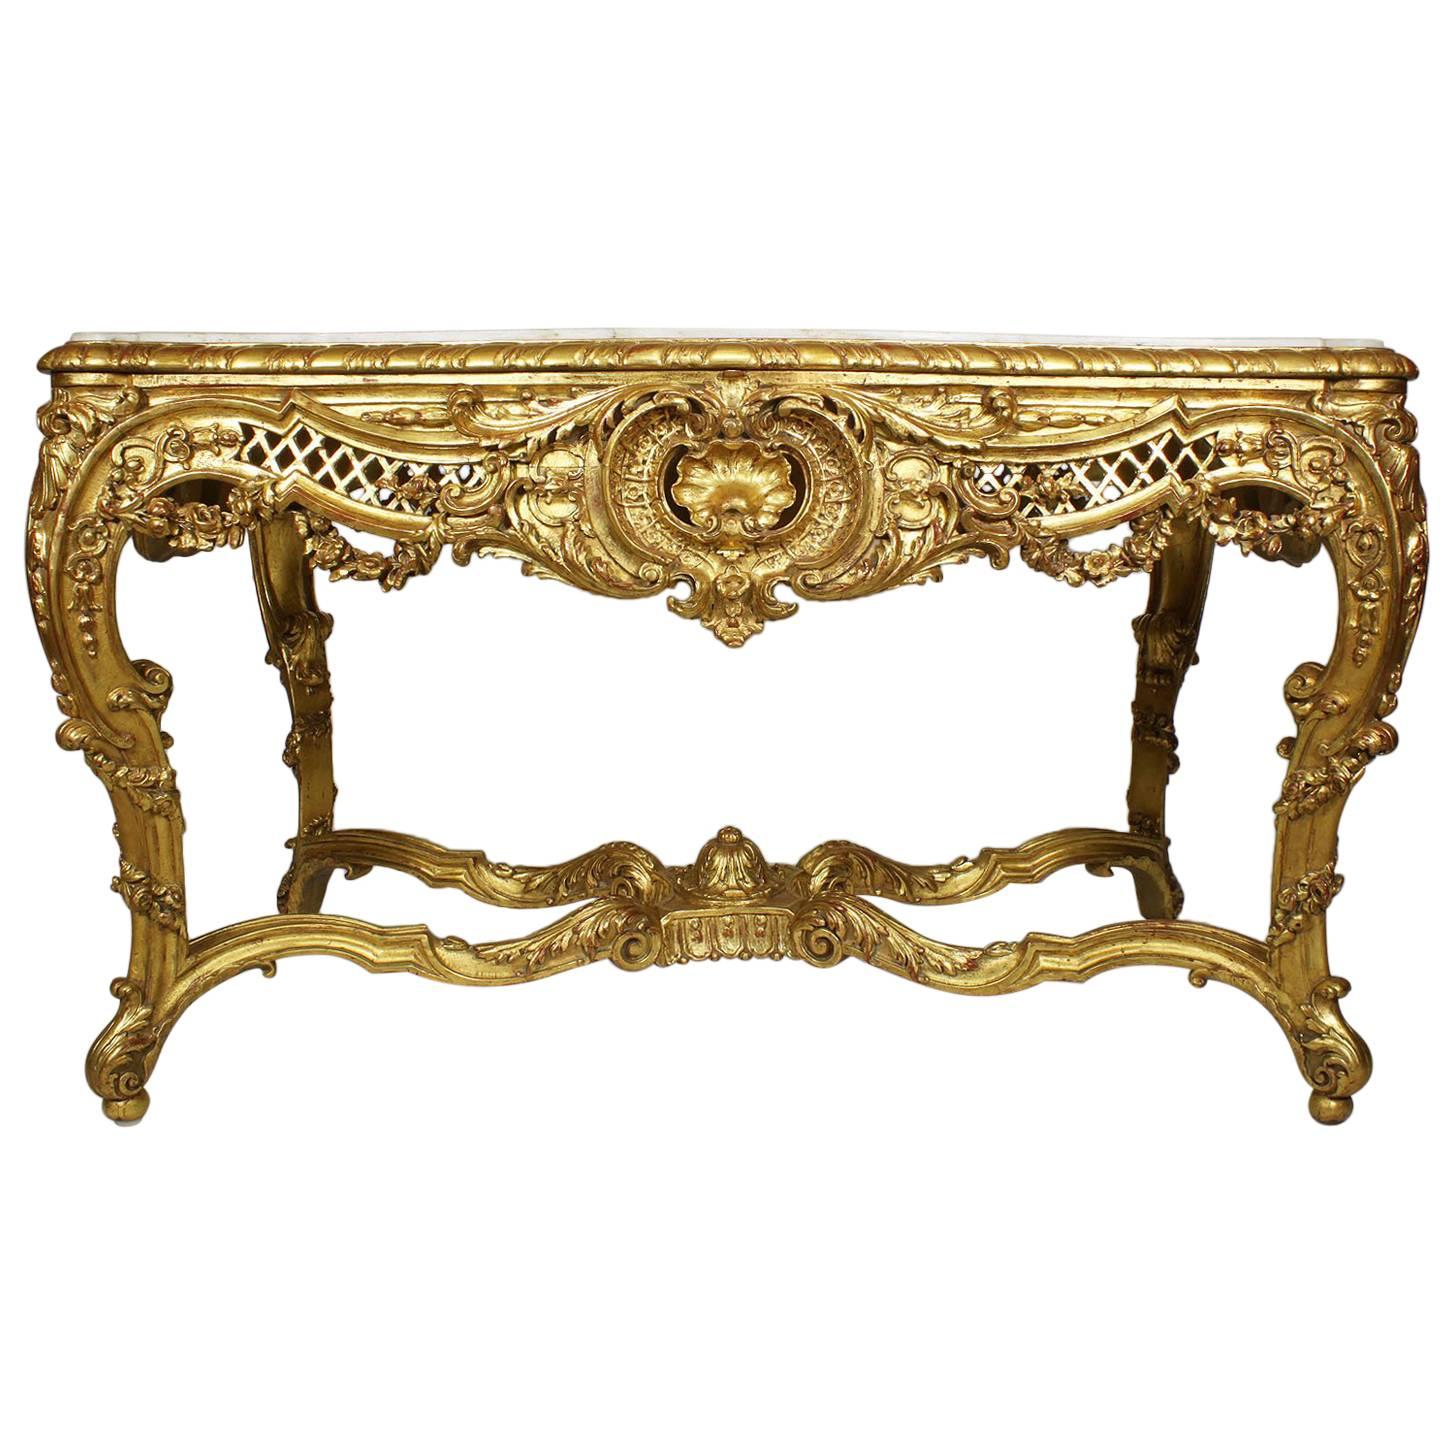 French Belle Époque 19th-20th Century Giltwood Carved Rococo Center Hall Table For Sale